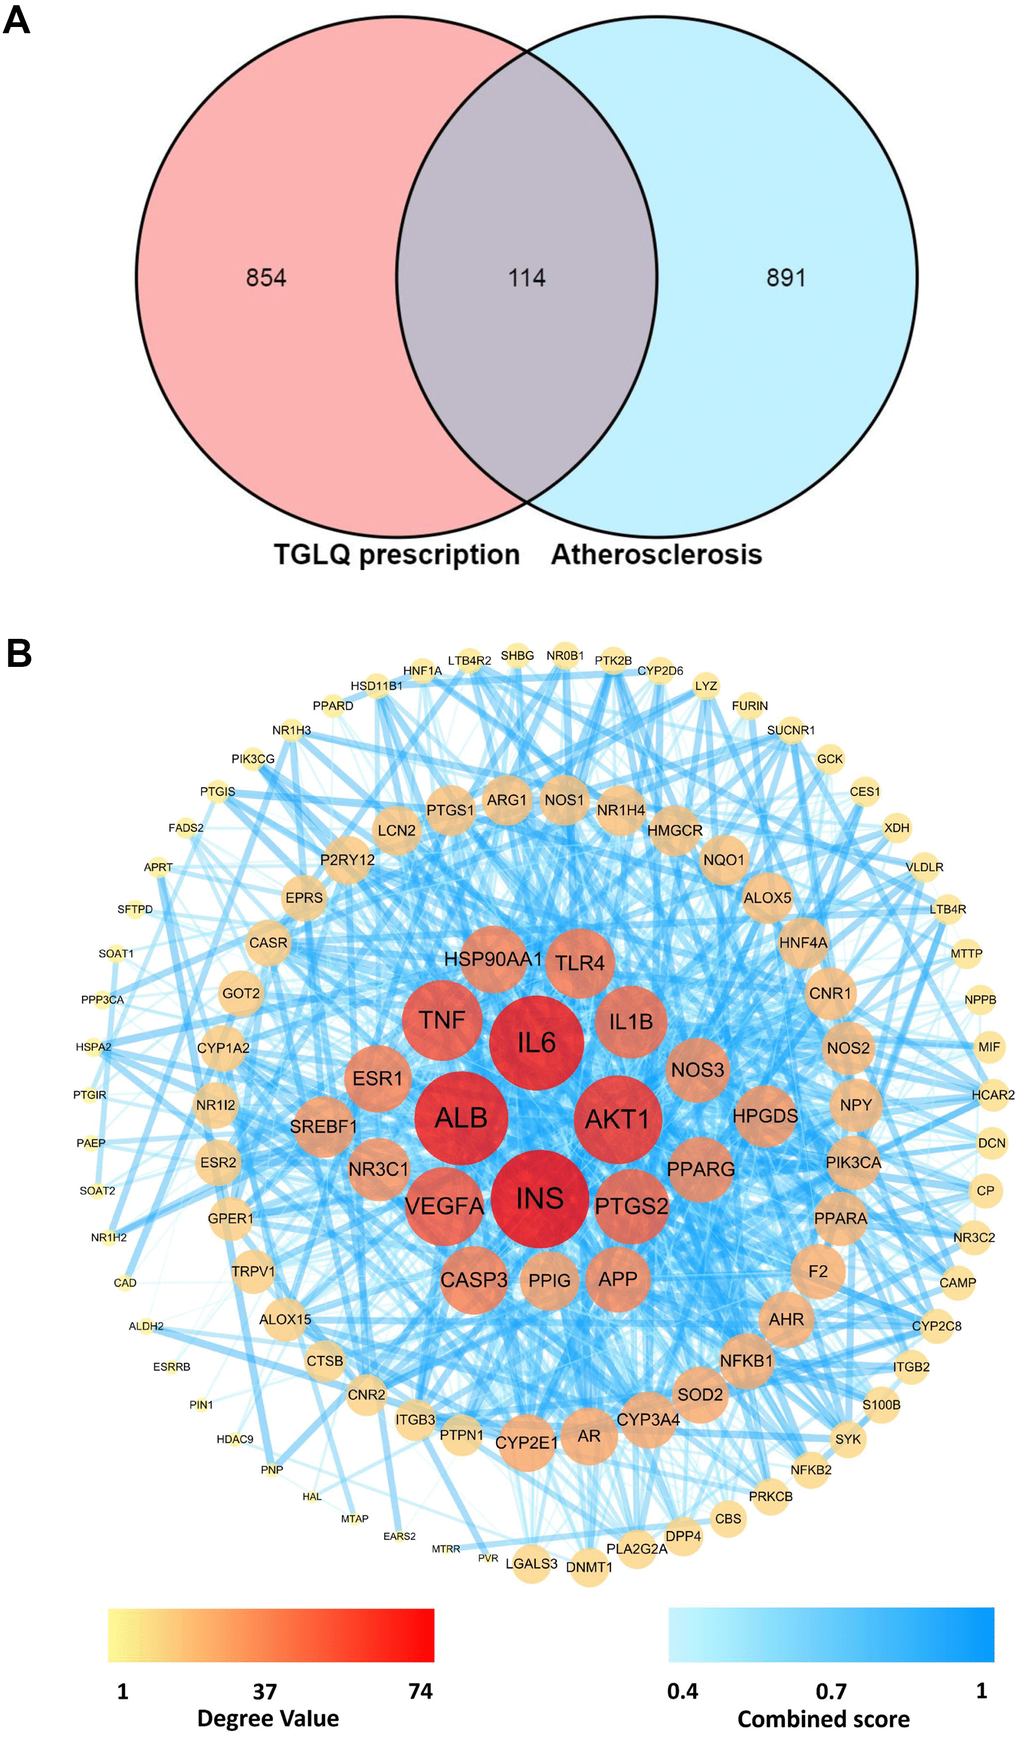 Acquirement of the key targets between TGLQ putative targets and AS therapeutic targets through network analysis. (A) Venn diagram of common targets of TGLQ and AS; (B) Acquirement of the 63 key targets between TGLQ and AS by network topological analysis.